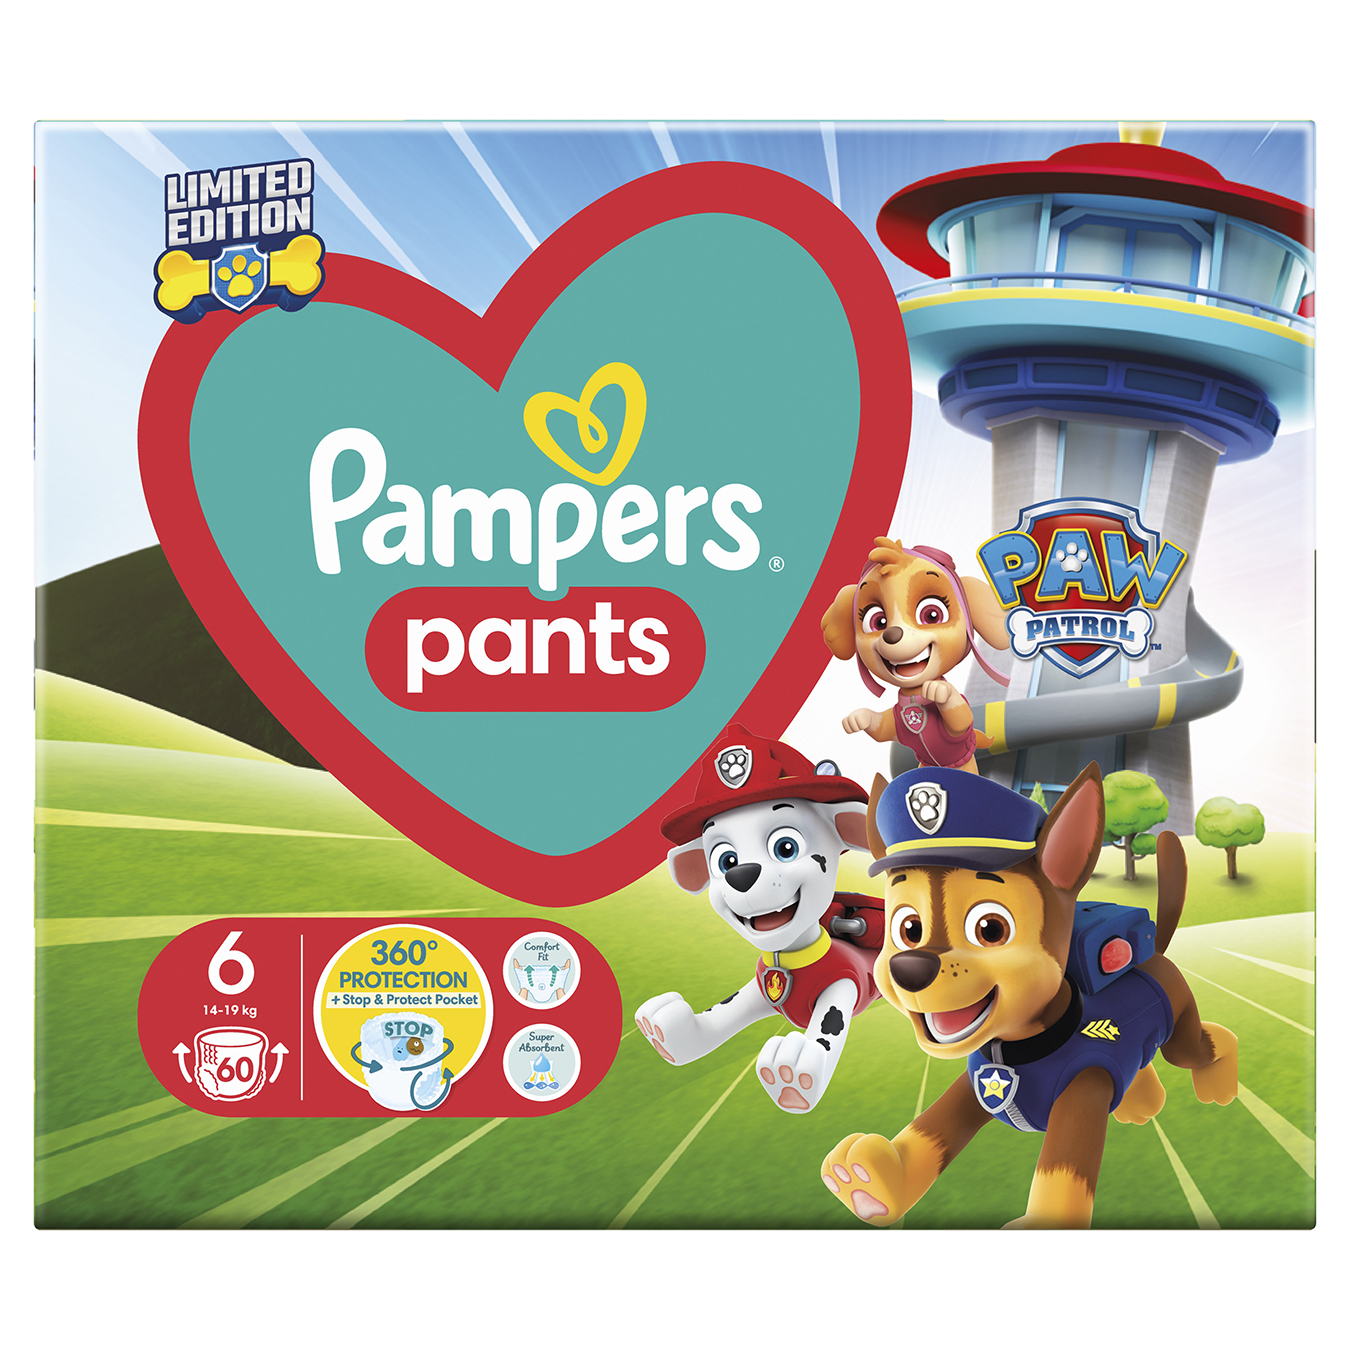 Diapers-panties Pampers paw patrol limedit children's disposable pants extra large 14-19kg 60pcs